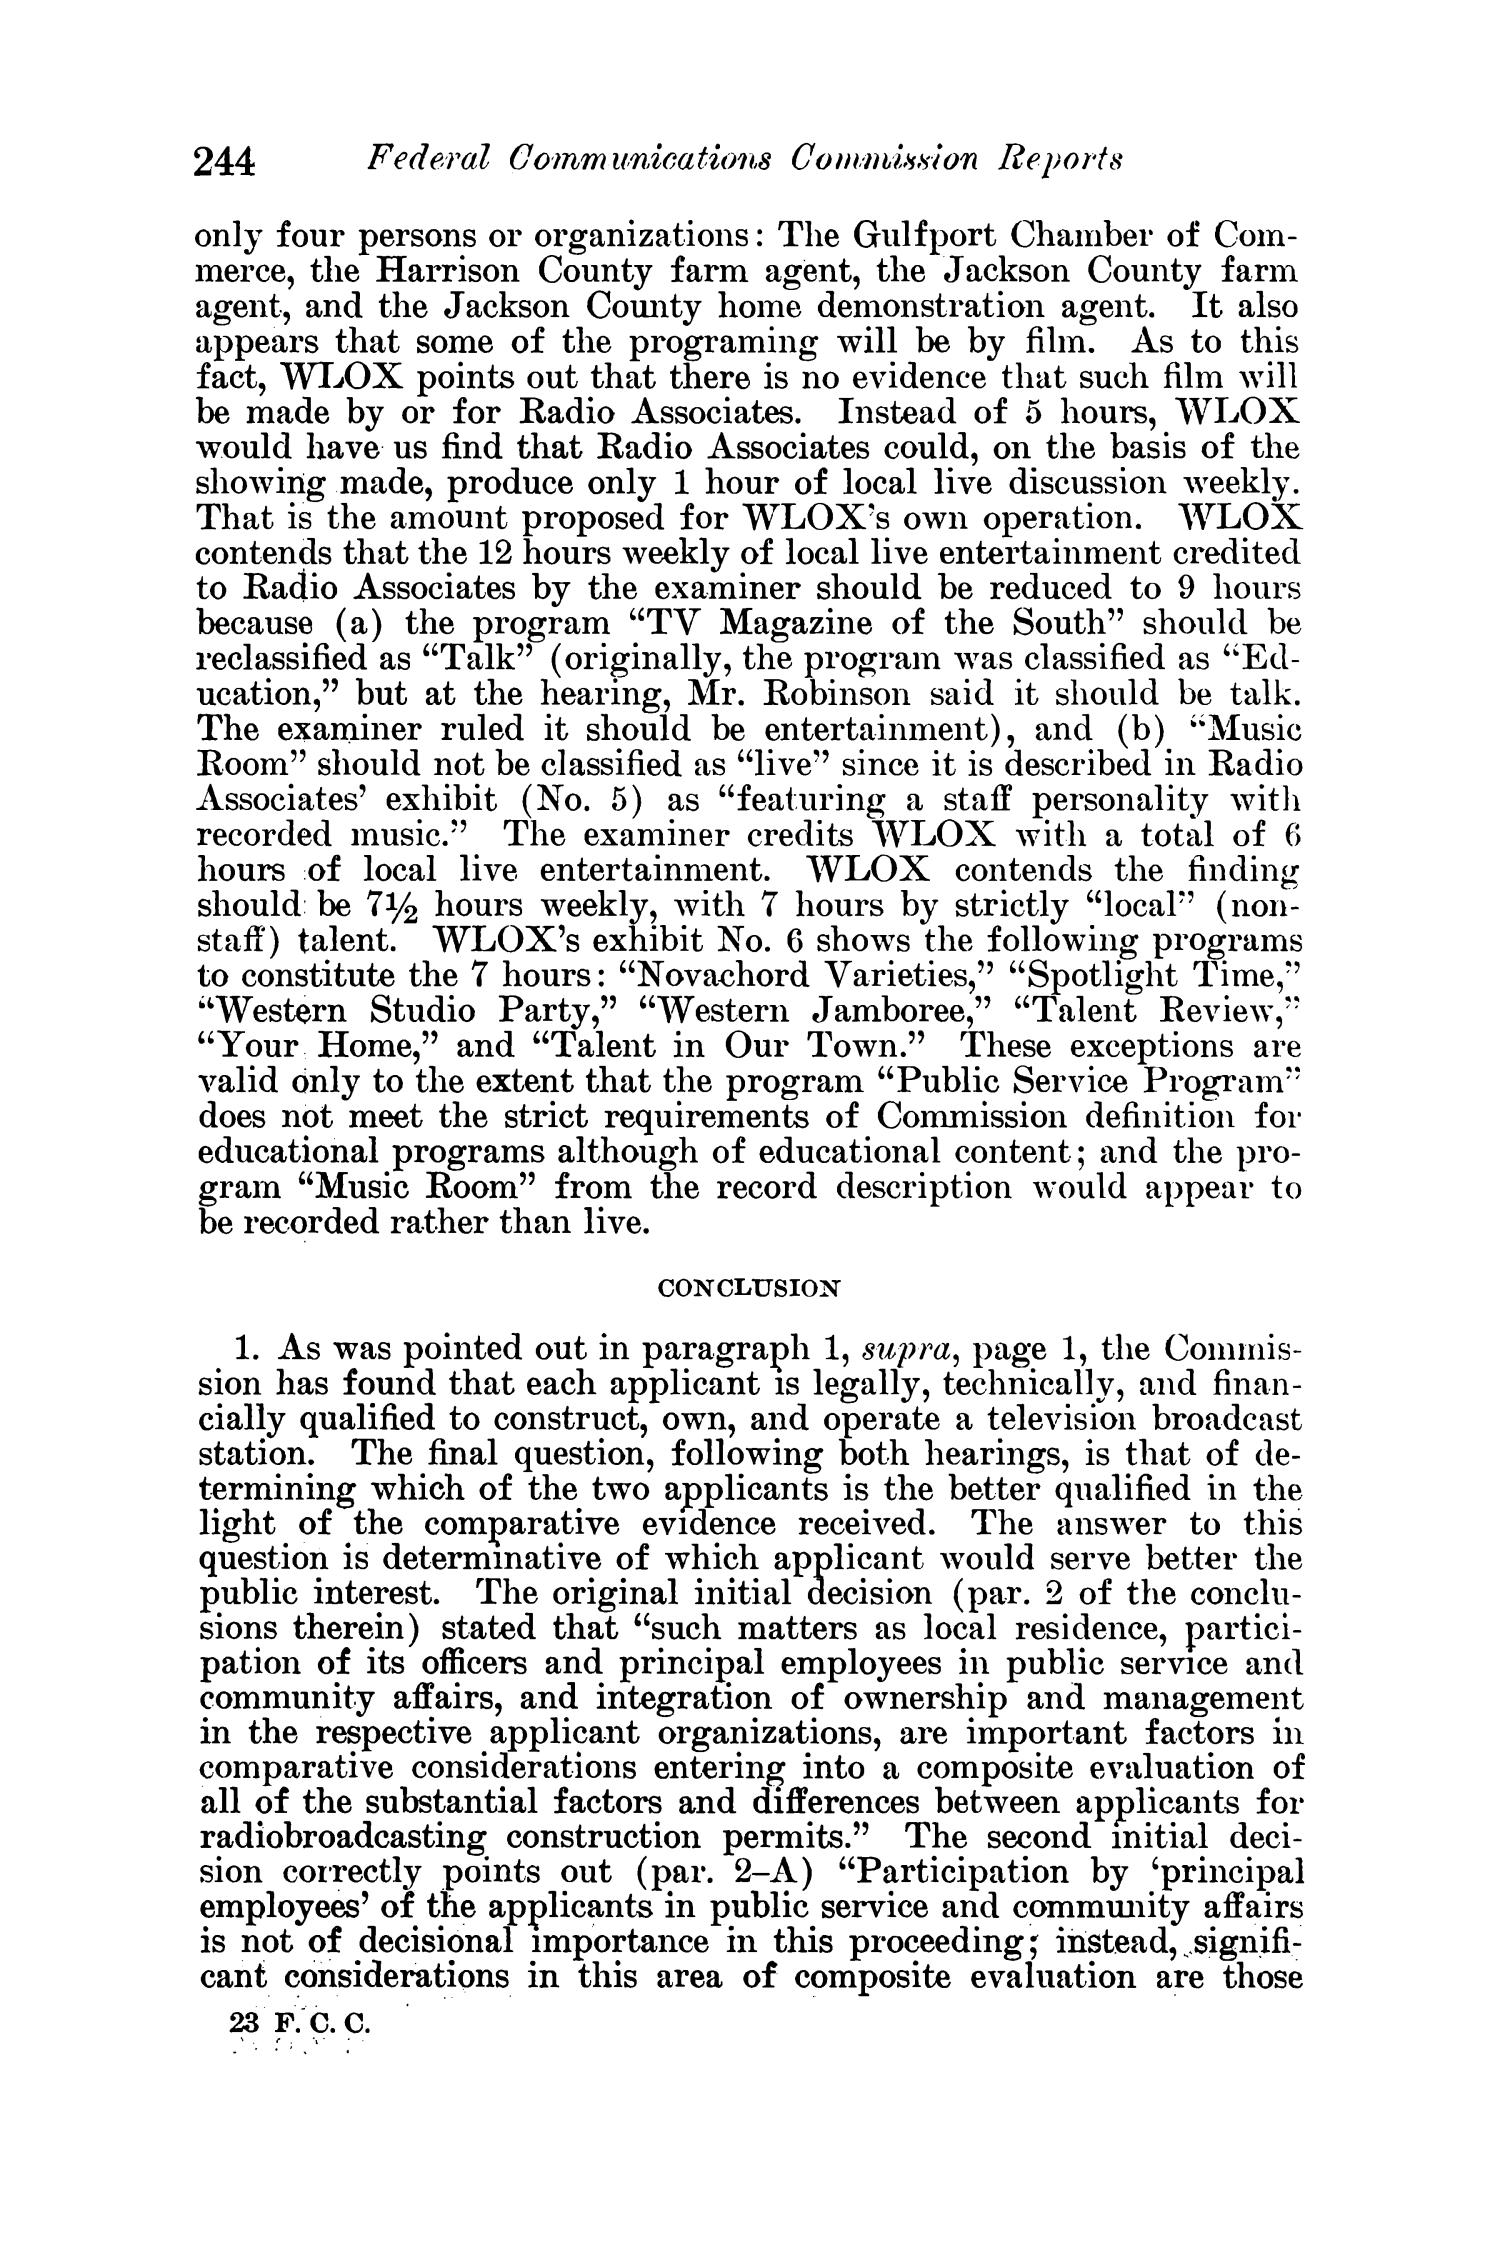 FCC Reports, Volume 23, July 12, 1957 to December 27, 1957
                                                
                                                    244
                                                